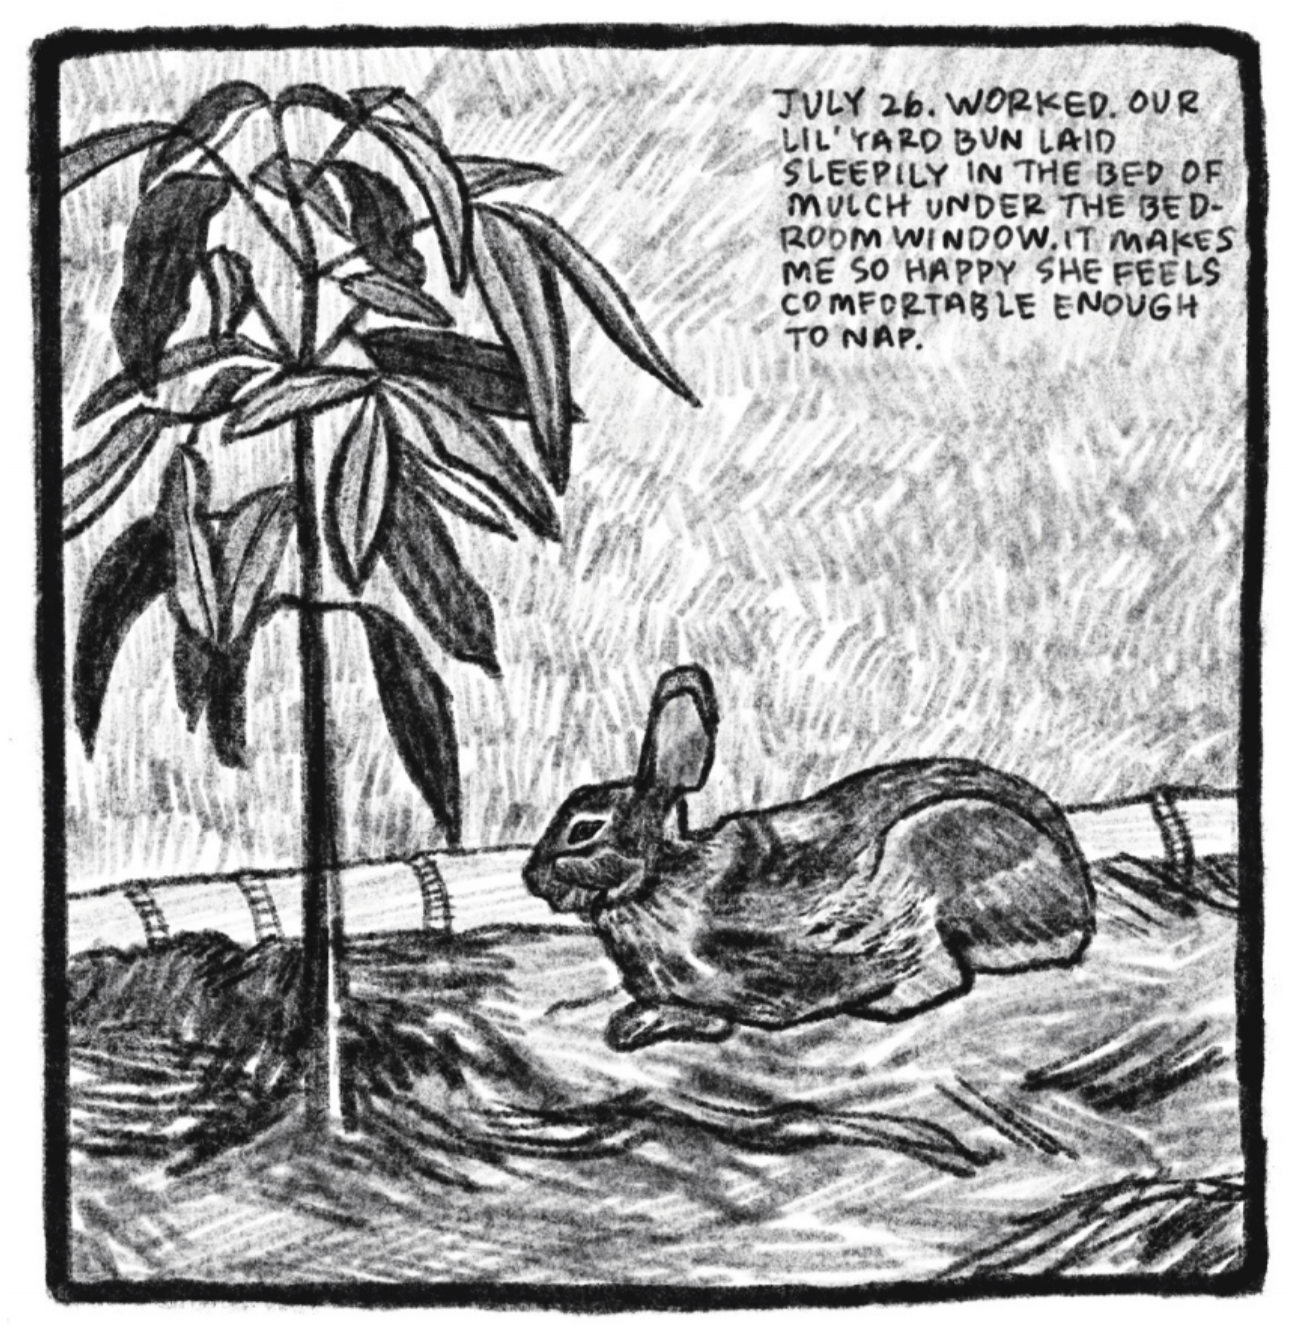 6. A little rabbit lies on a bed of mulch next to a sapling. â€œJuly 26. Worked. Our lilâ€™ yard bun laid sleepily in the bed of mulch under the bedroom window. It makes me so happy she feels comfortable enough to nap.â€